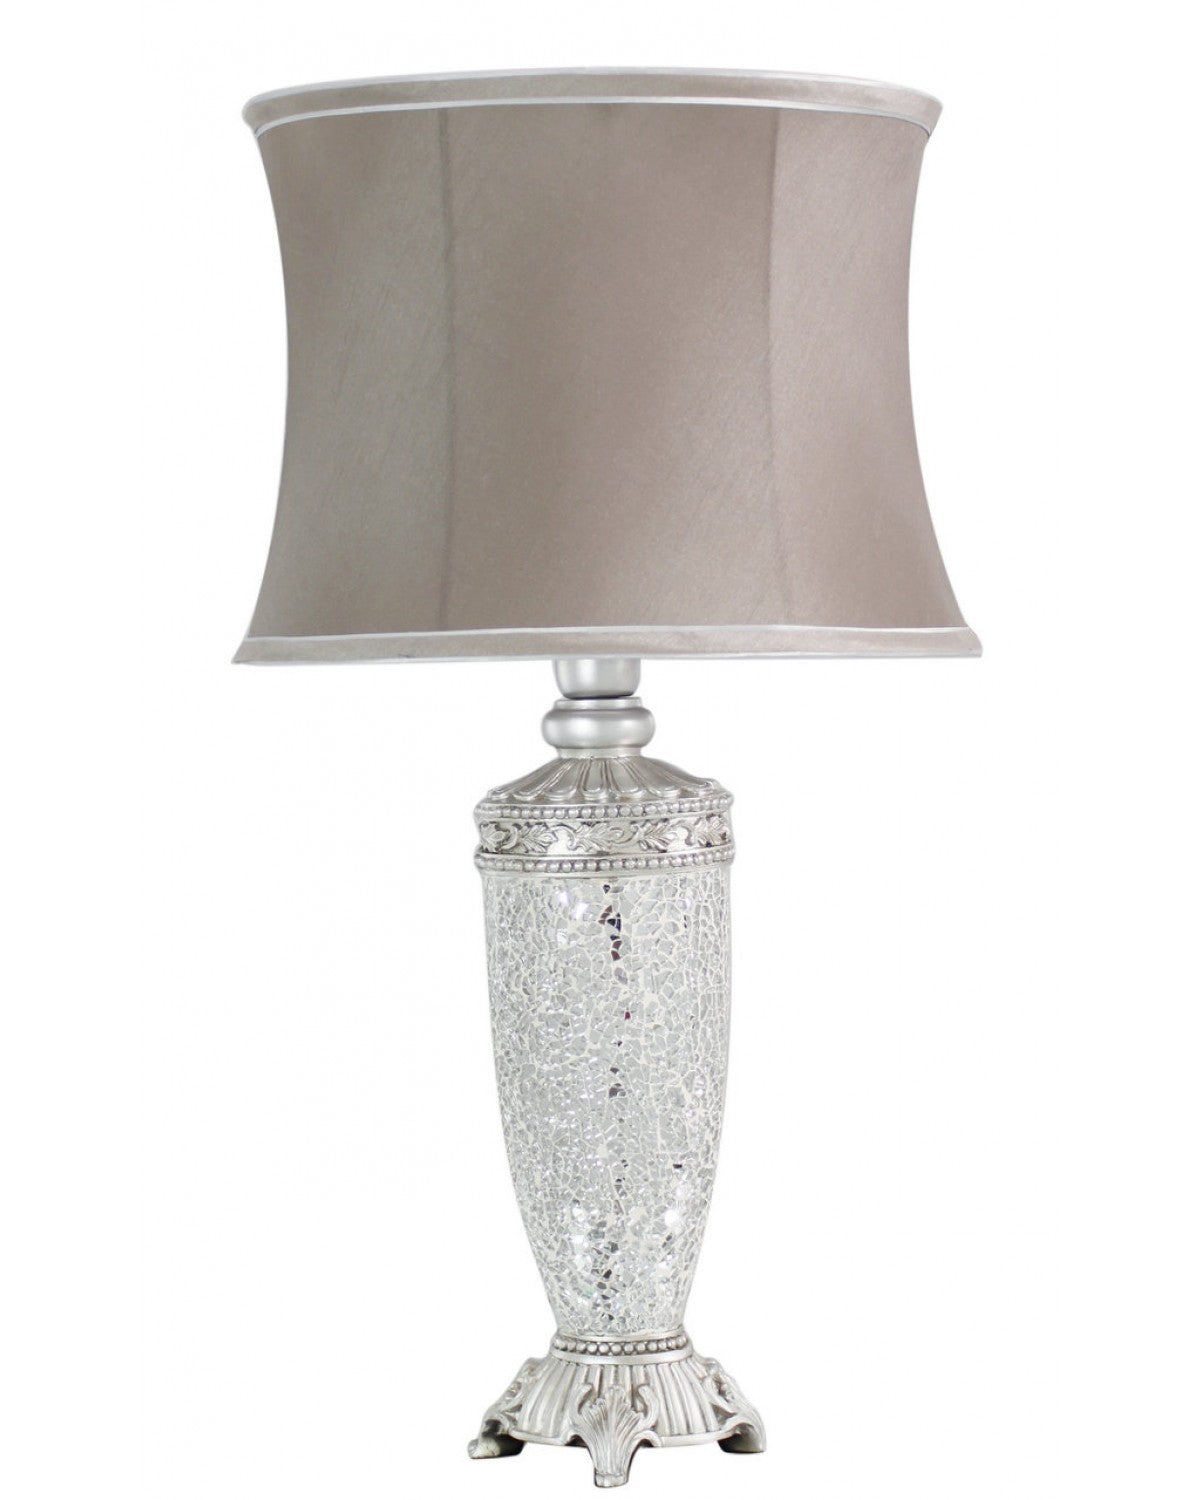 Deco Home Silver Sparkle Mosaic Antique Silver Regency Lamp With Taupe Trimmed Shade